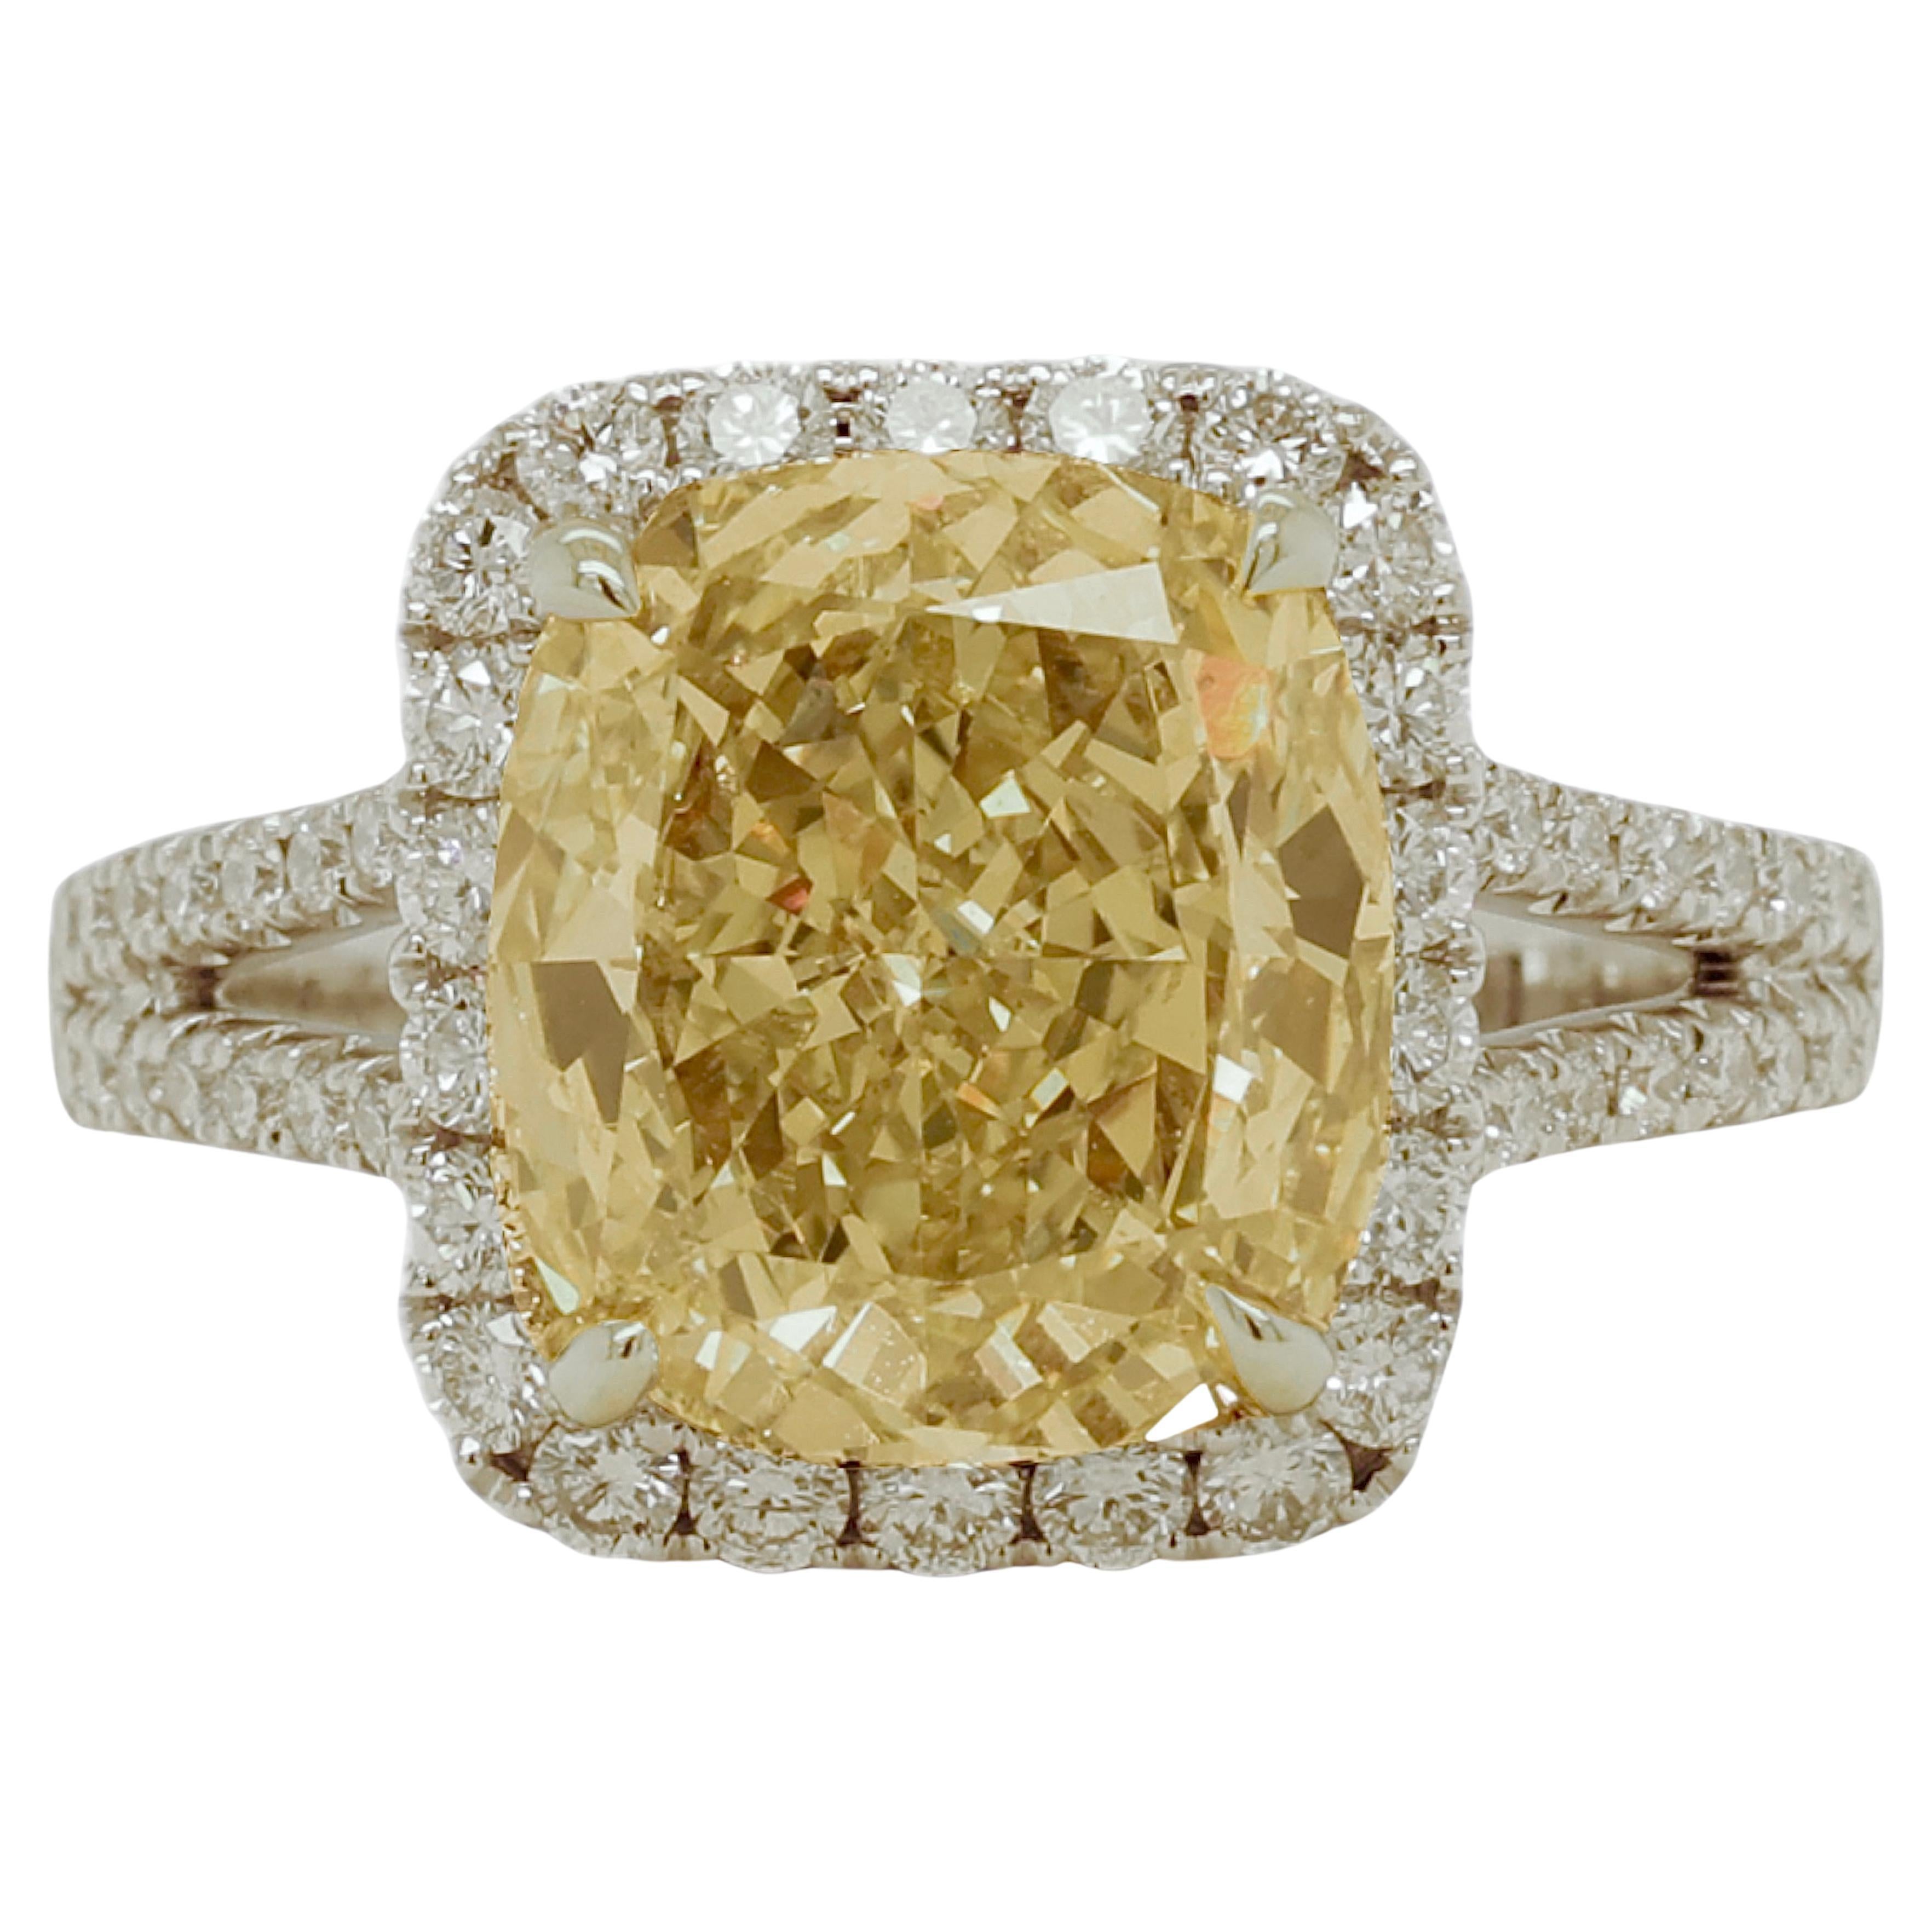 18 kt. White Gold Engagement Ring With Large 5 Ct Fancy Light Yellow Diamond